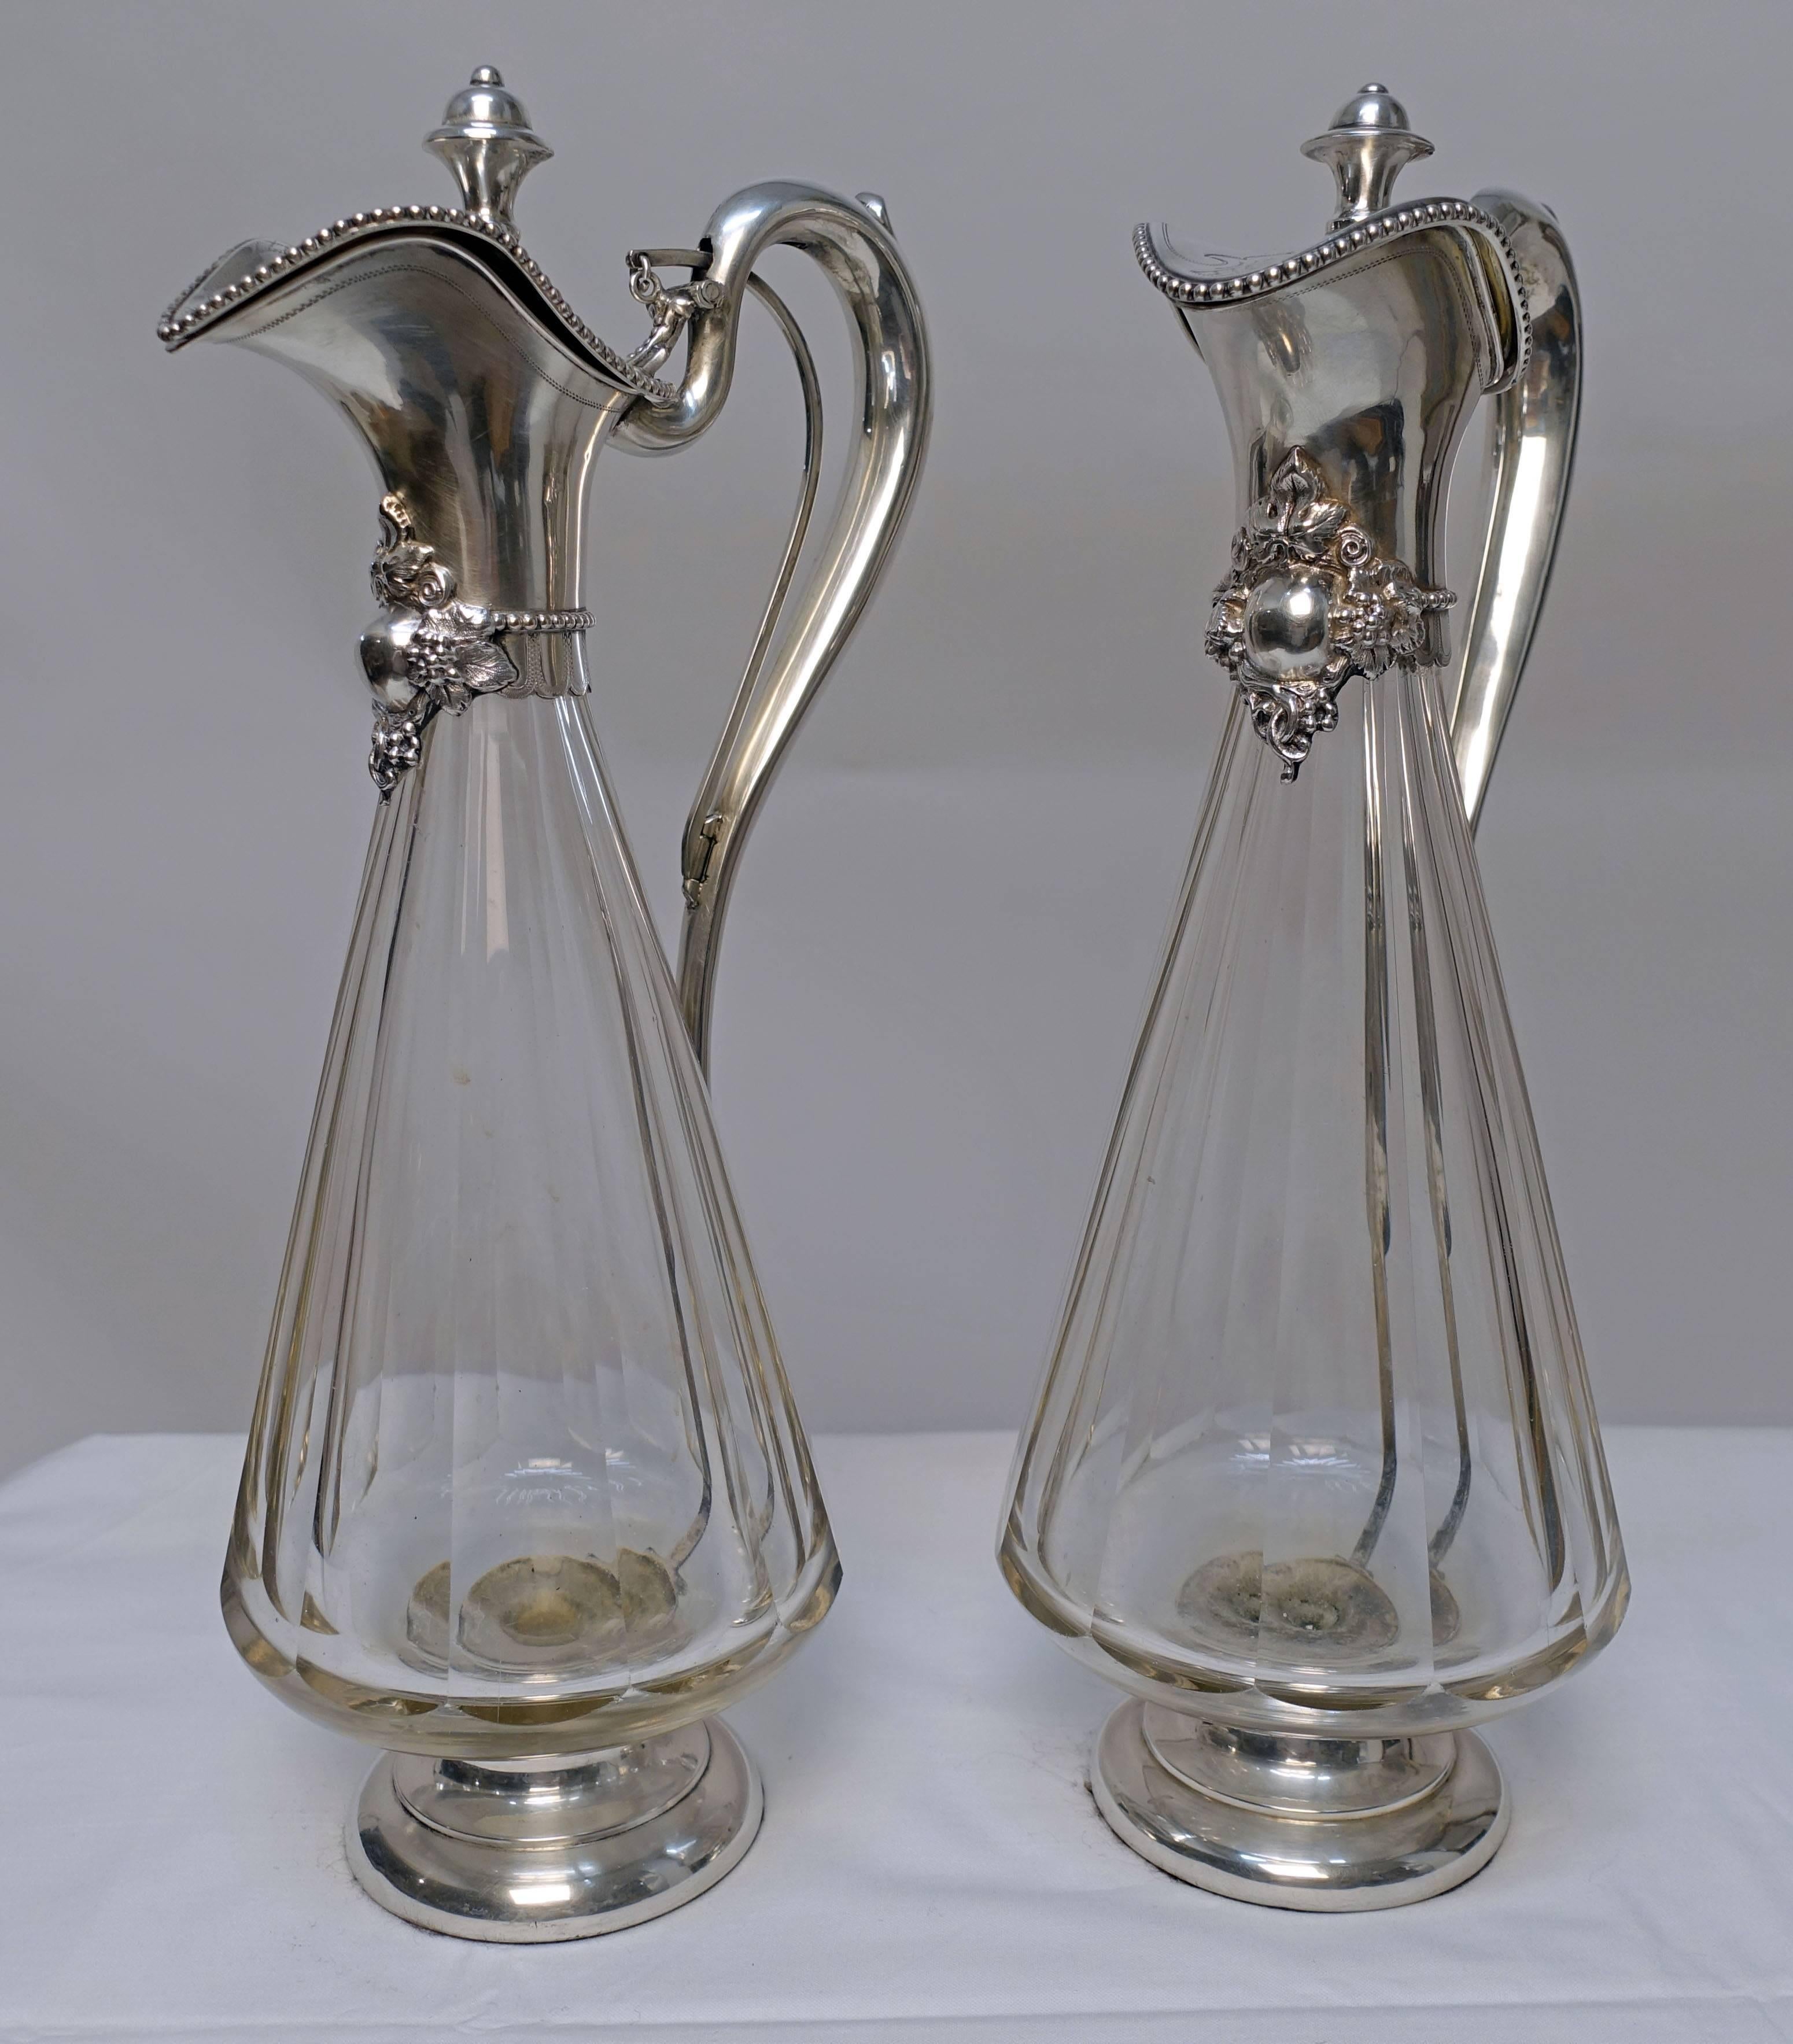 A matched pair of Art Nouveau style wine clarets or decanters, wheel cut panel glass with silver (at least 800 silver, possibly sterling). Having makers mark on the lid. Continental European (possibly France), 19th century, circa 1890.